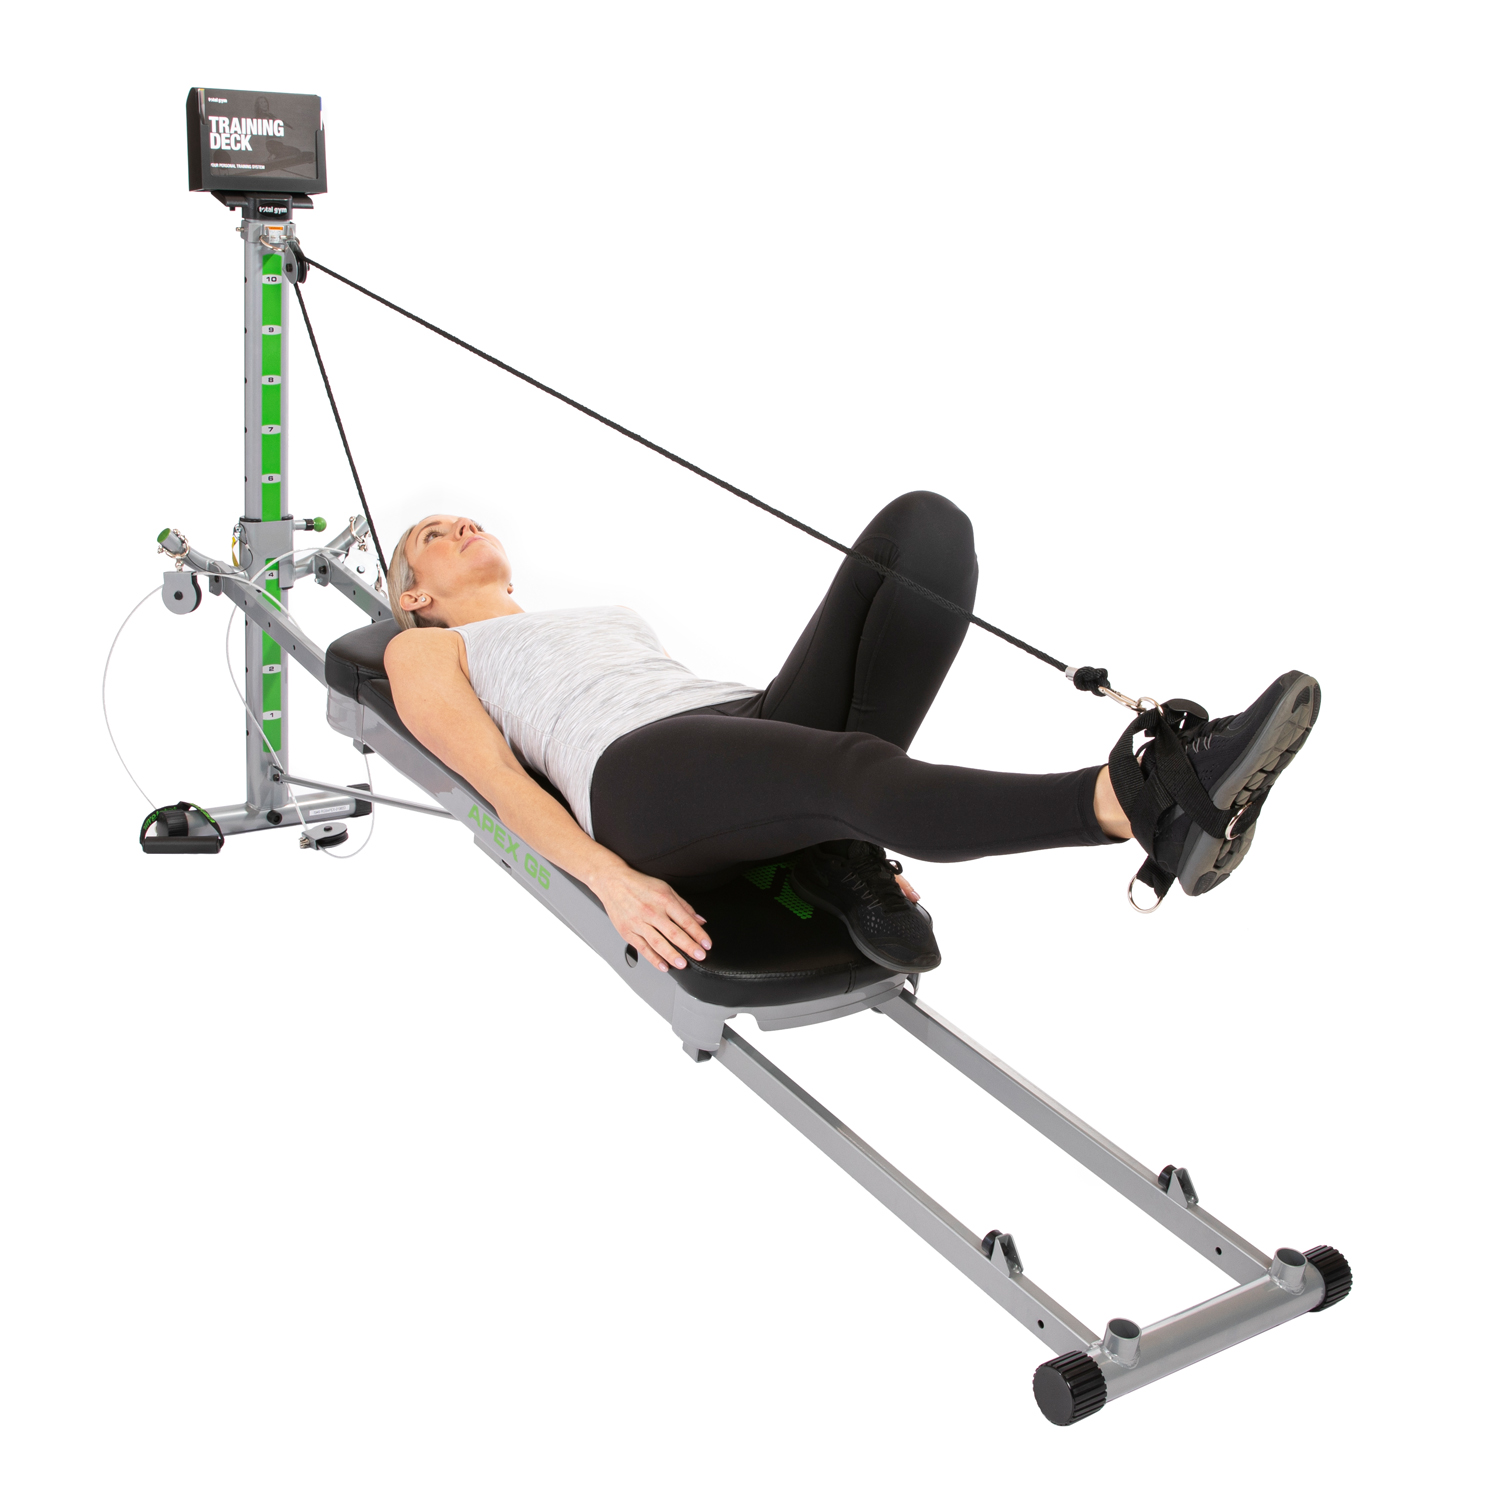 Total Gym APEX G5 Home Fitness Incline Weight Training with 10 Resistance Levels - image 5 of 11